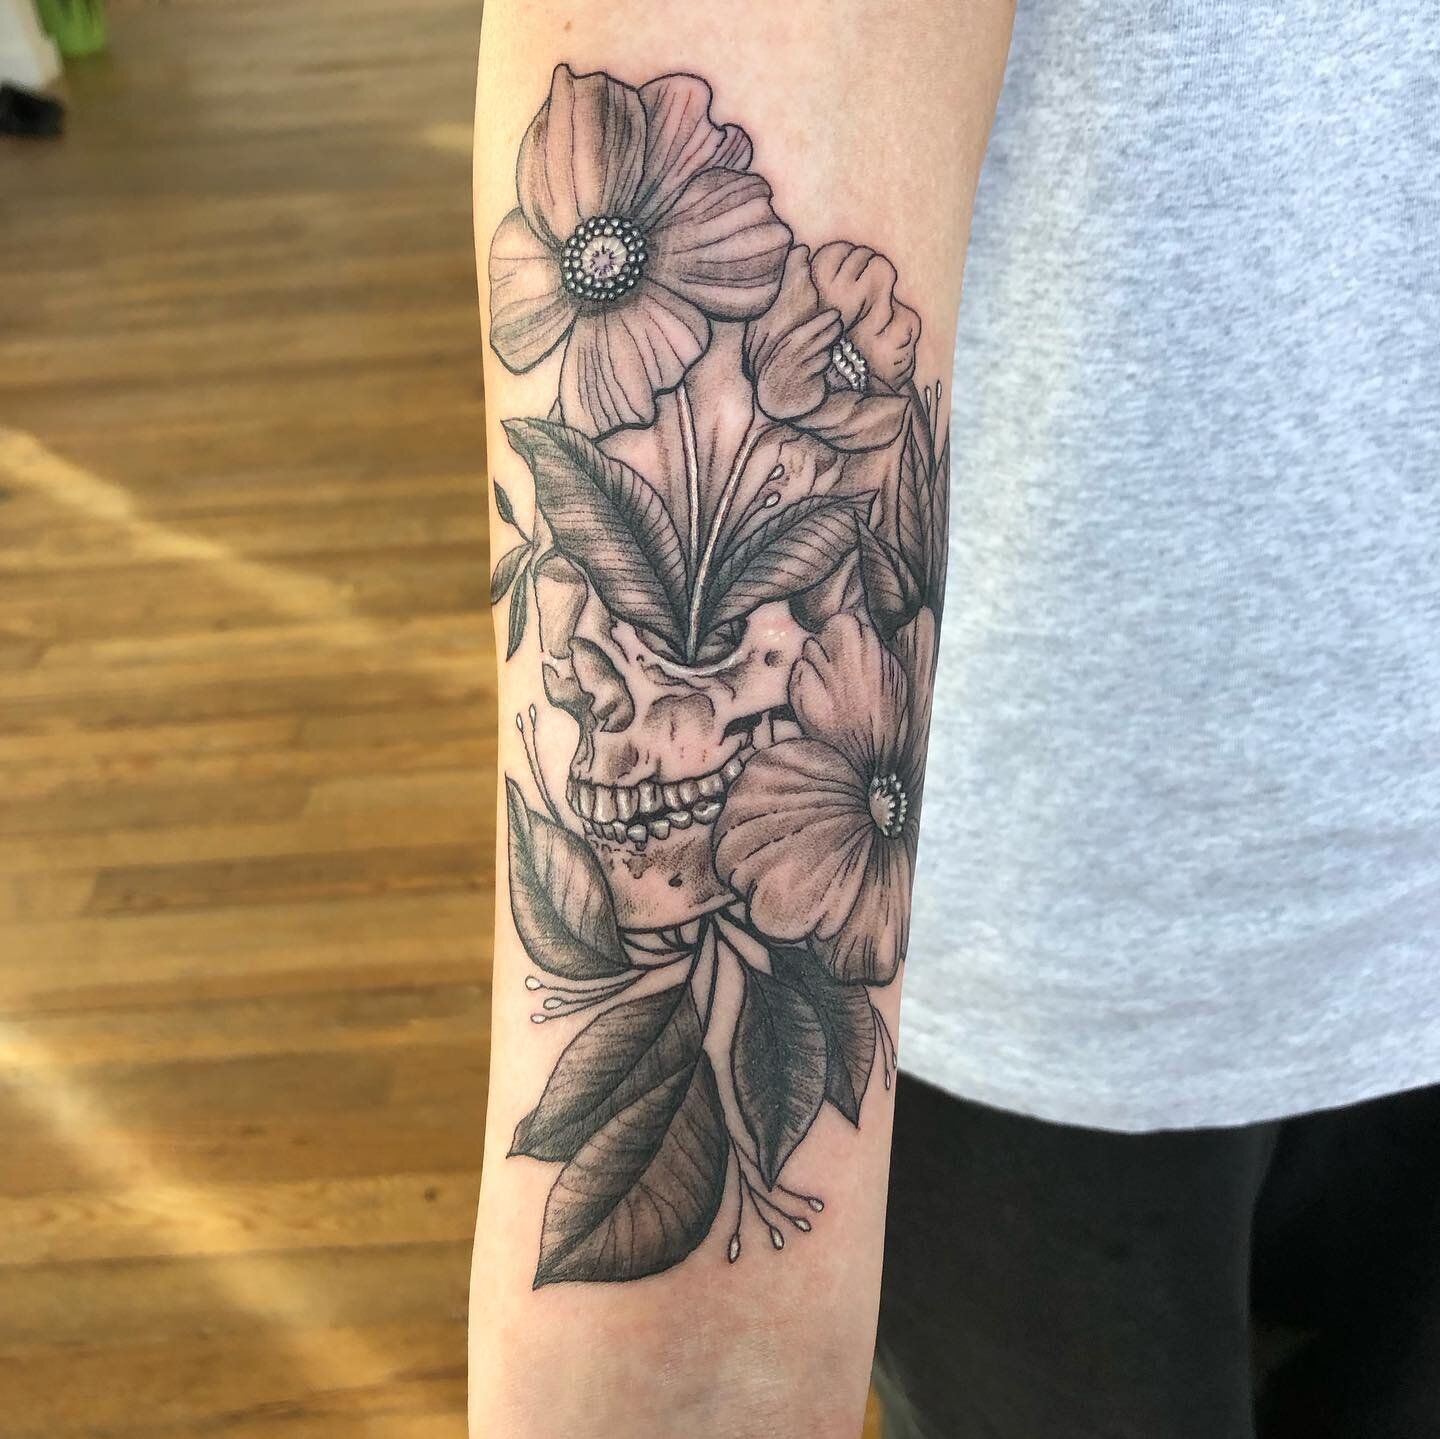 Fun skull and flowers from this morning.